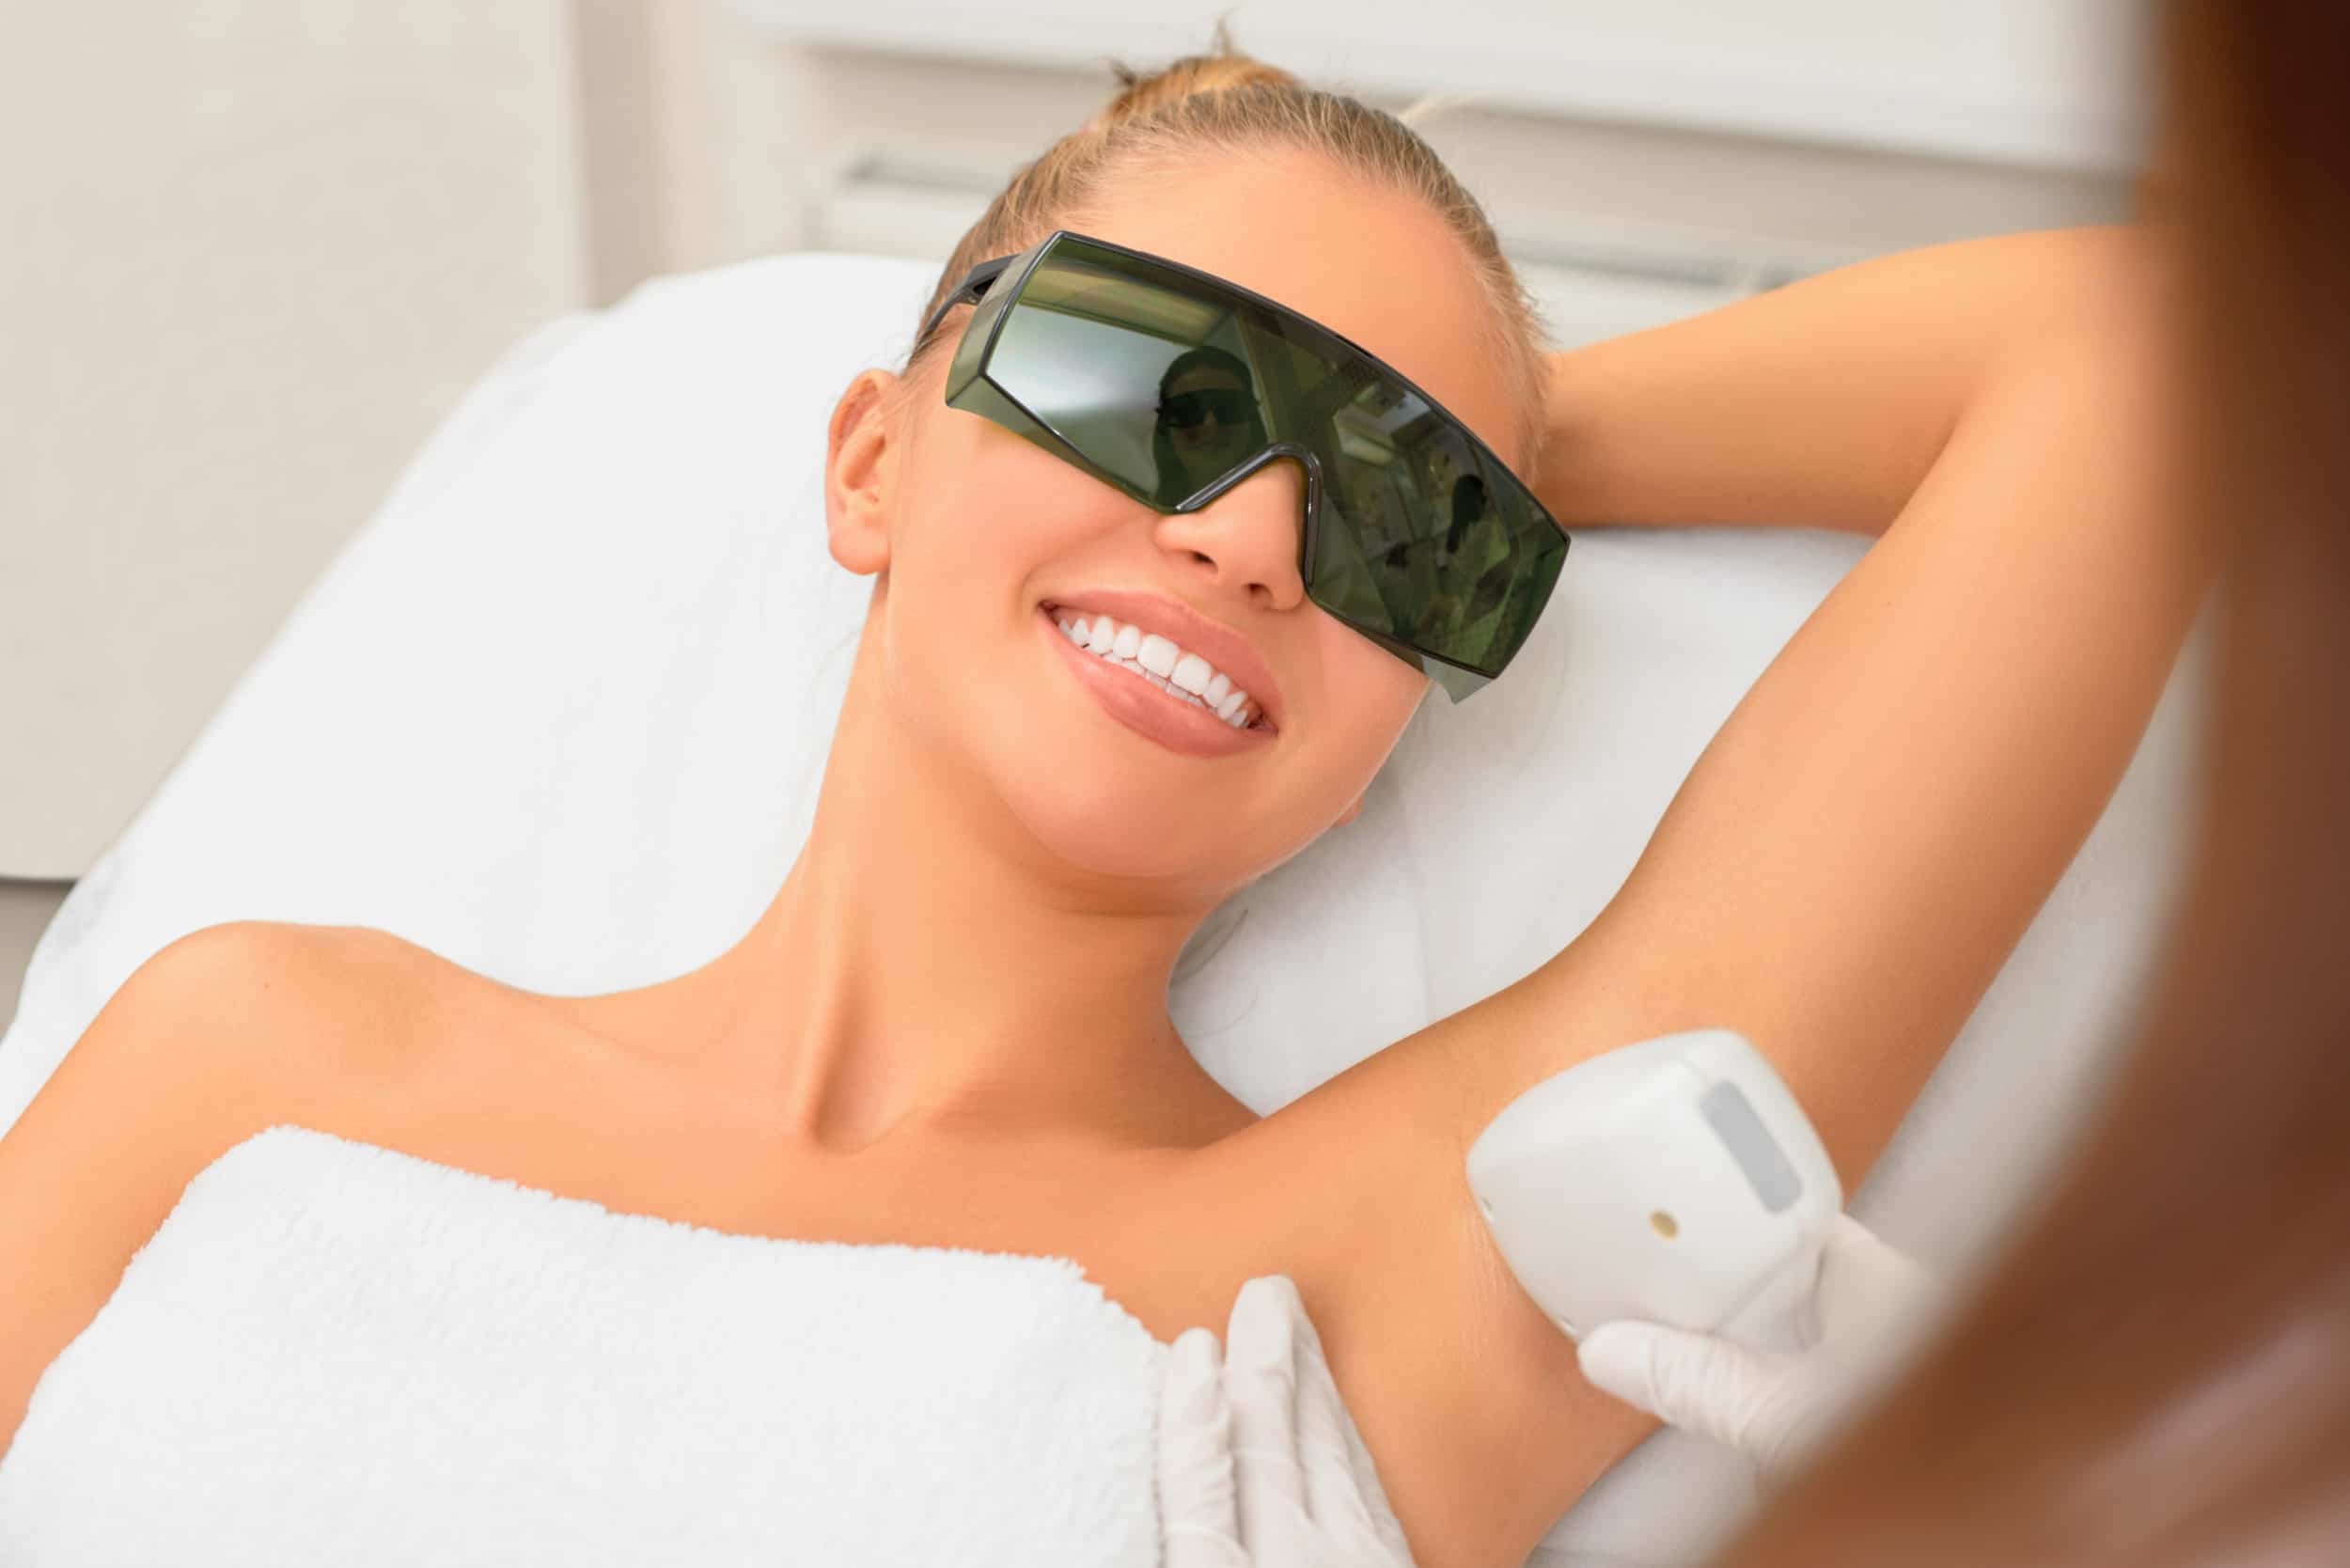 A woman getting laser hair removal in her armpits